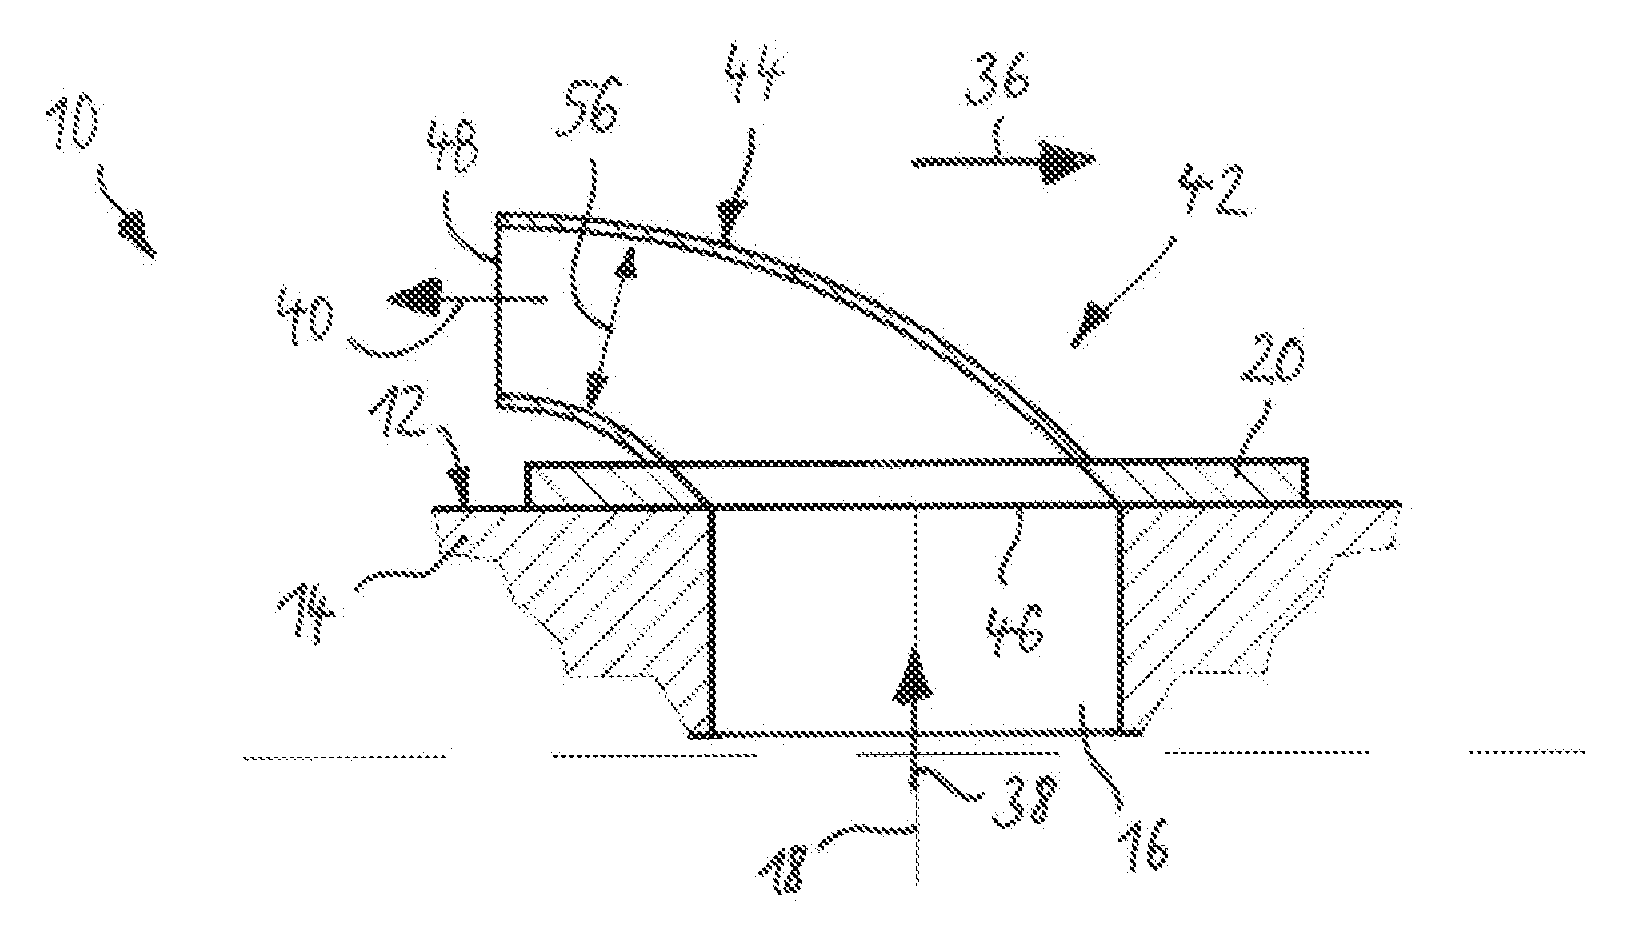 Solid-wall scroll centrifuge having an energy recovery device